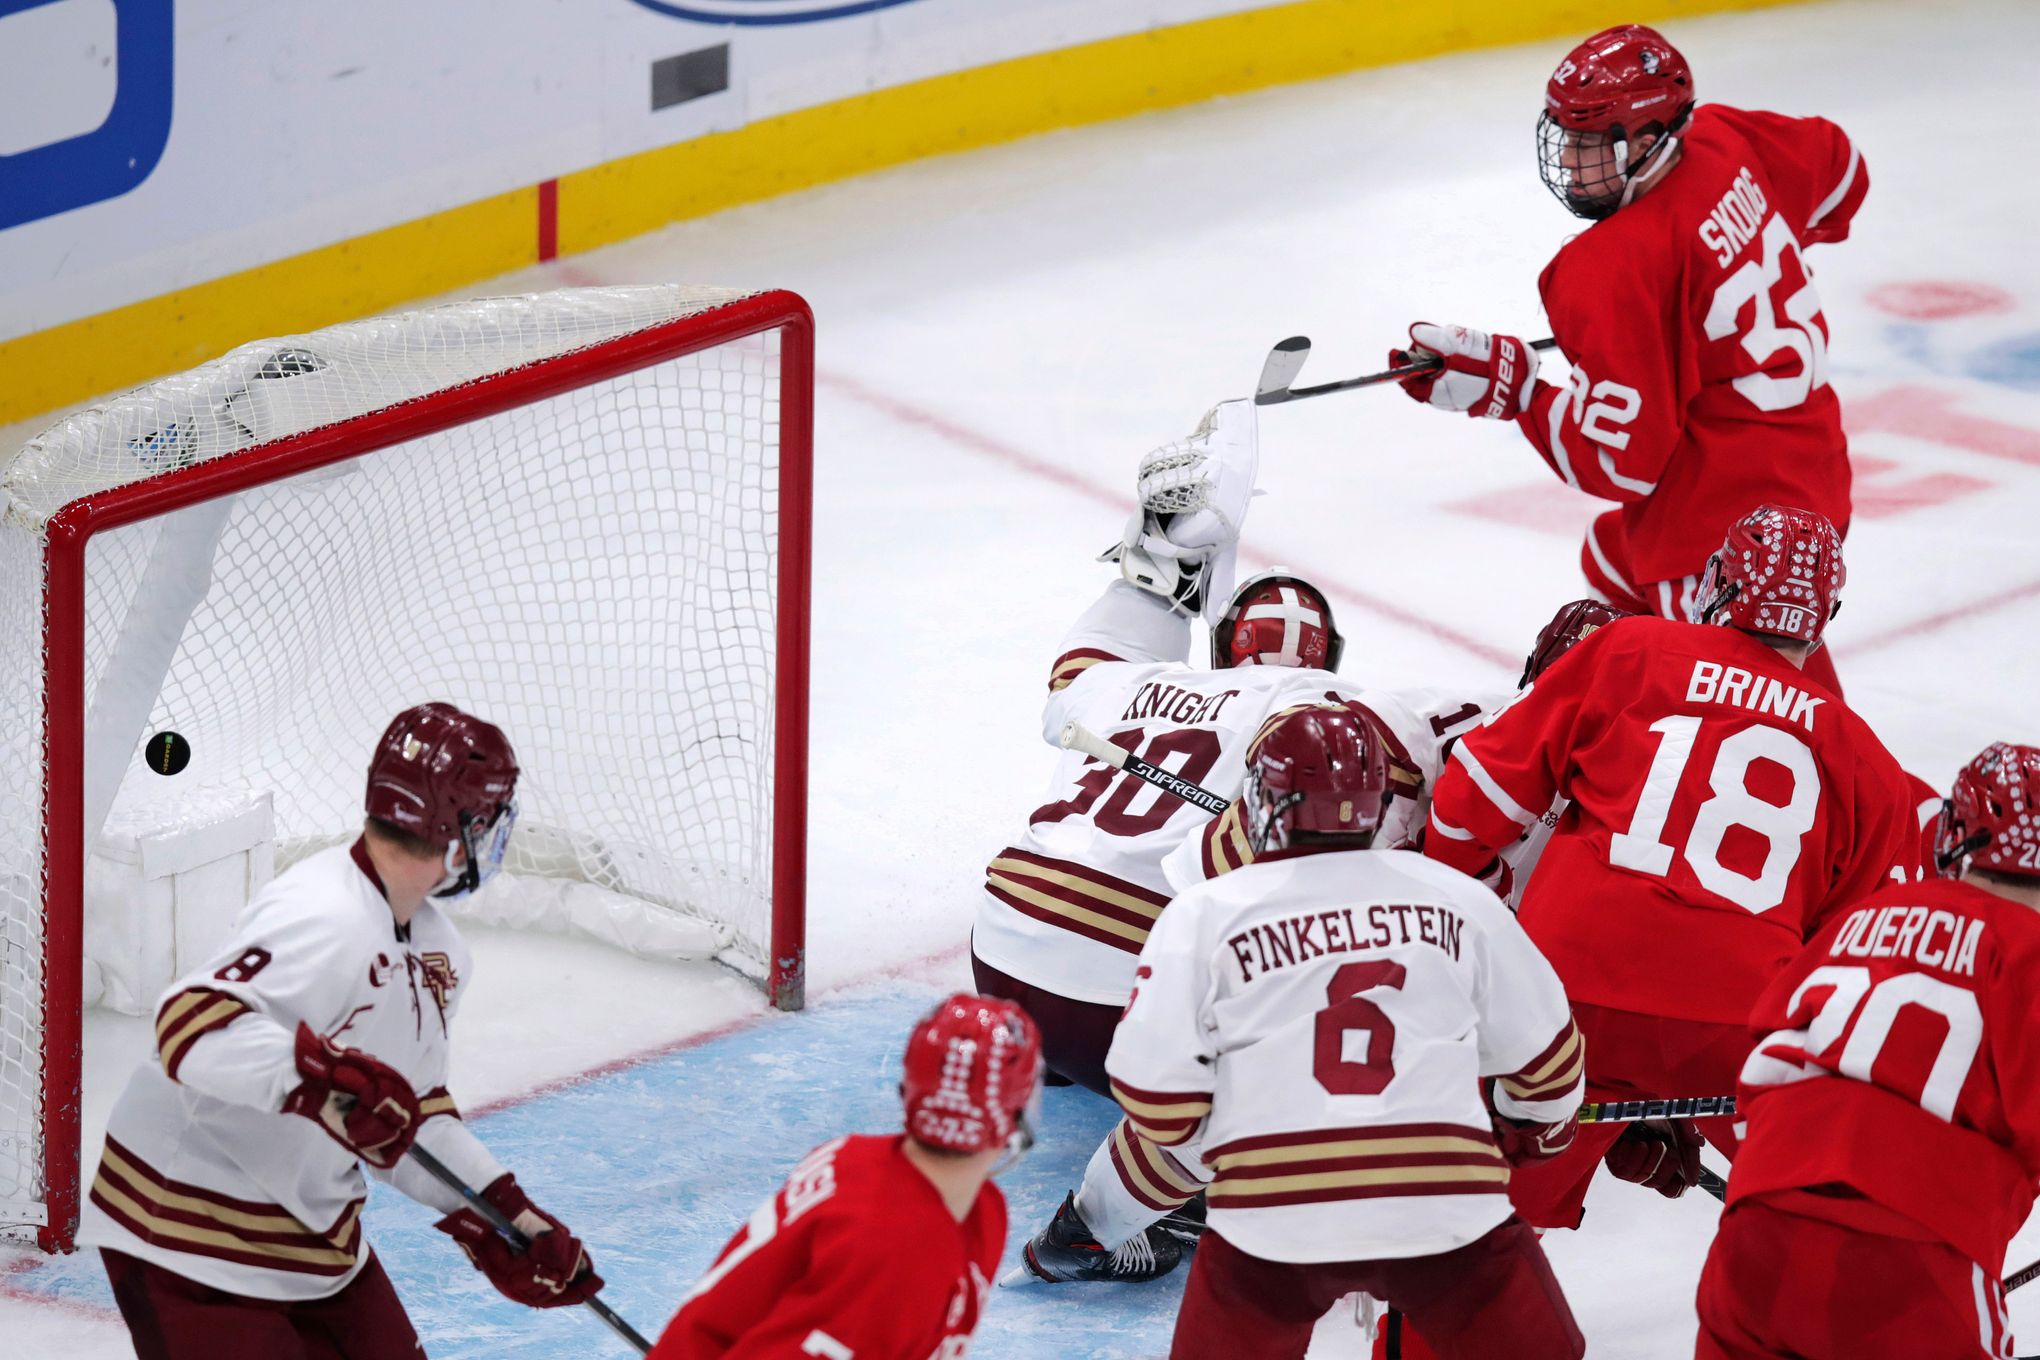 Northeastern 3-Peats at Beanpot with 5-4 Double OT Win over BU